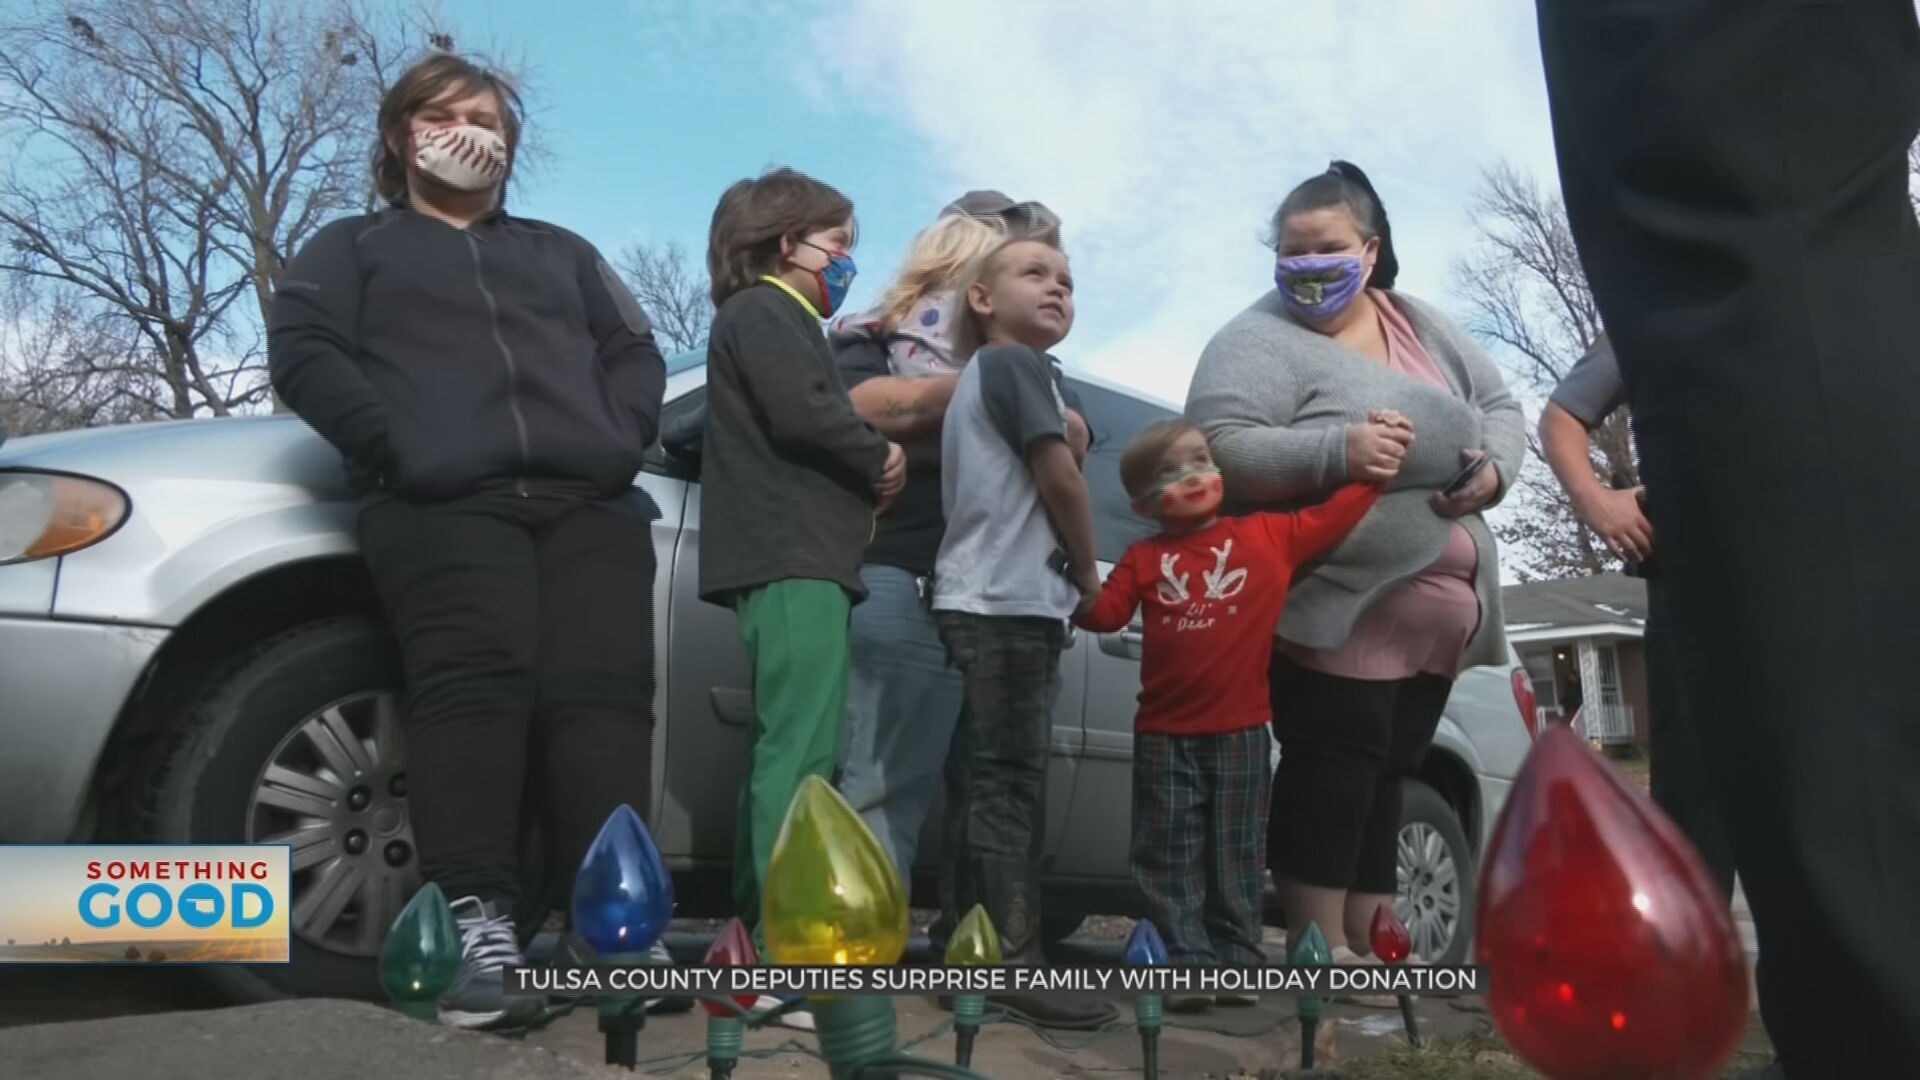 Family Of 7 Surprised With Holiday Donation From Tulsa County Deputies 